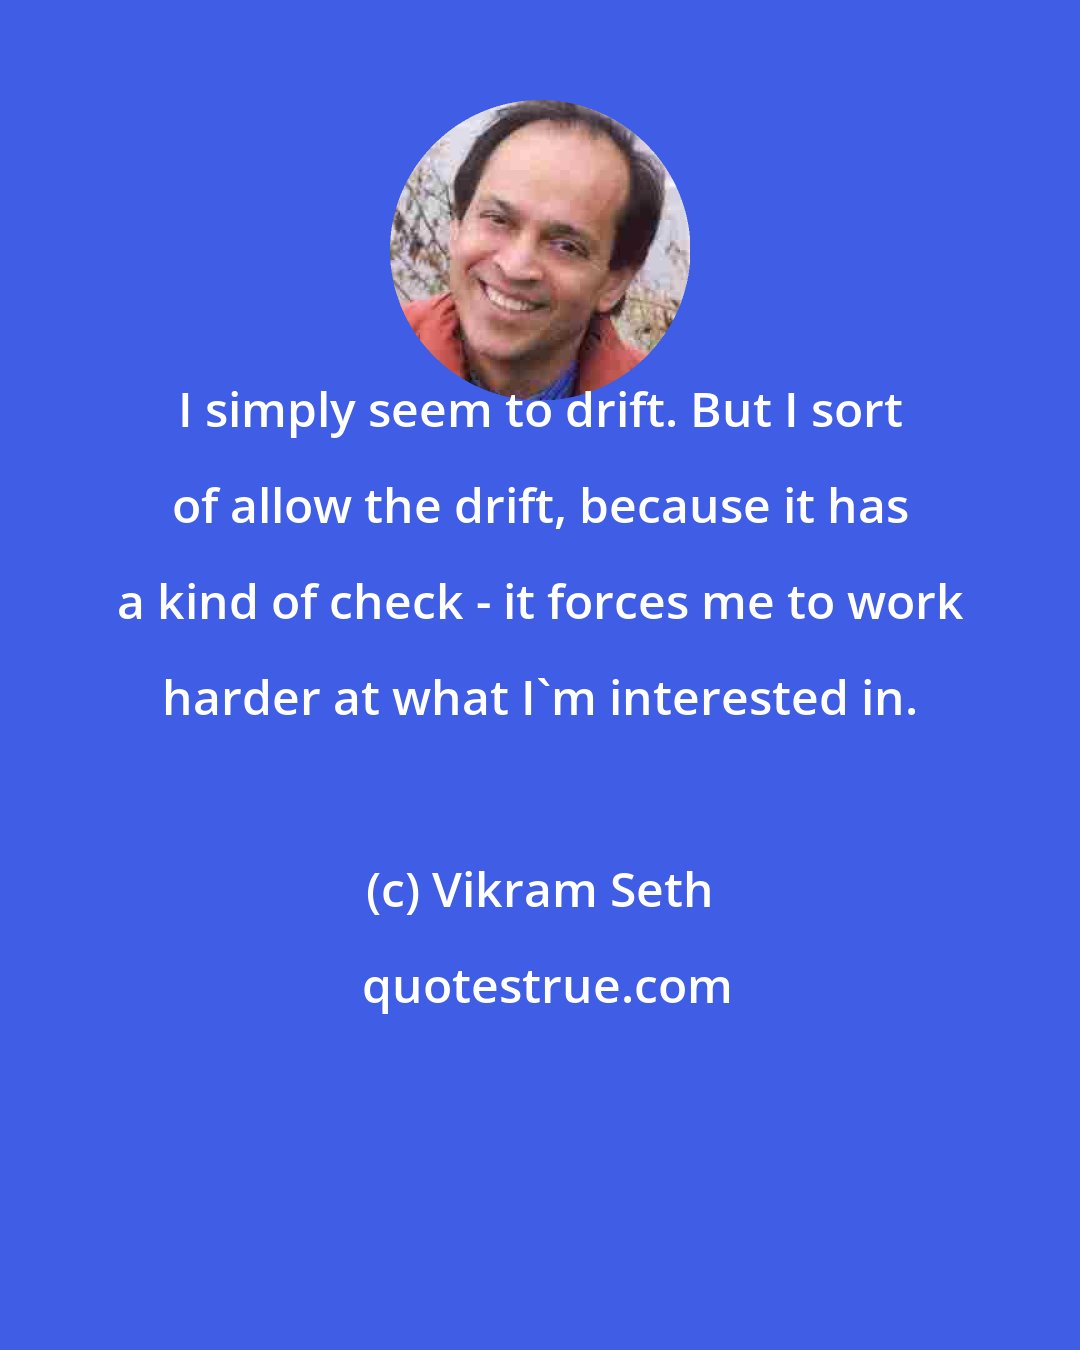 Vikram Seth: I simply seem to drift. But I sort of allow the drift, because it has a kind of check - it forces me to work harder at what I'm interested in.